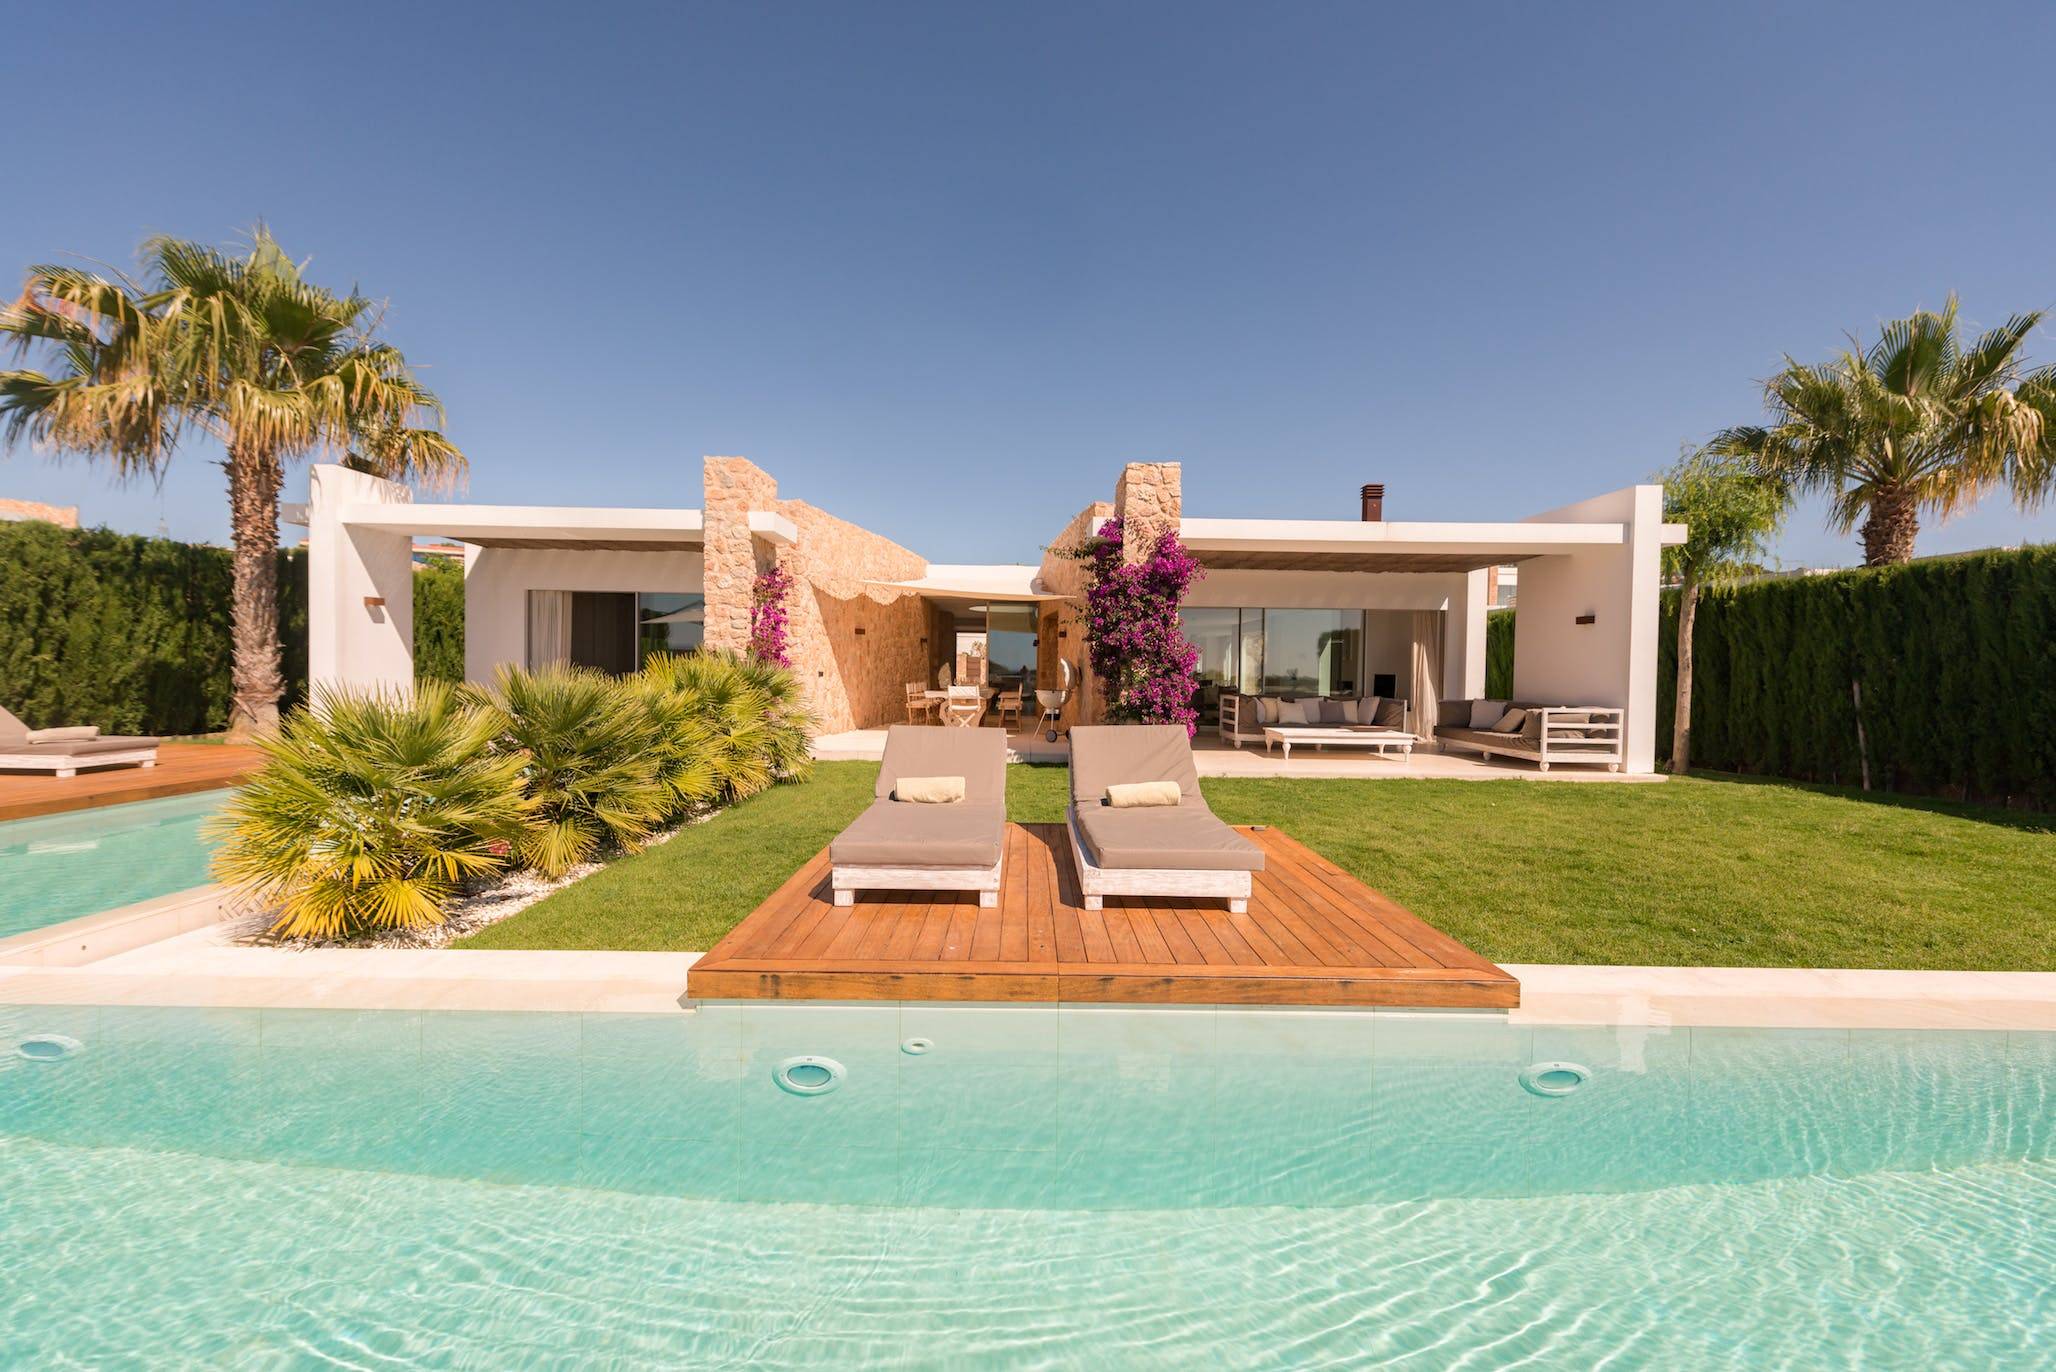 You are currently viewing Casa Matias – ‘Stunning modern villa just metres away from one of Ibiza’s most beautiful beaches.’